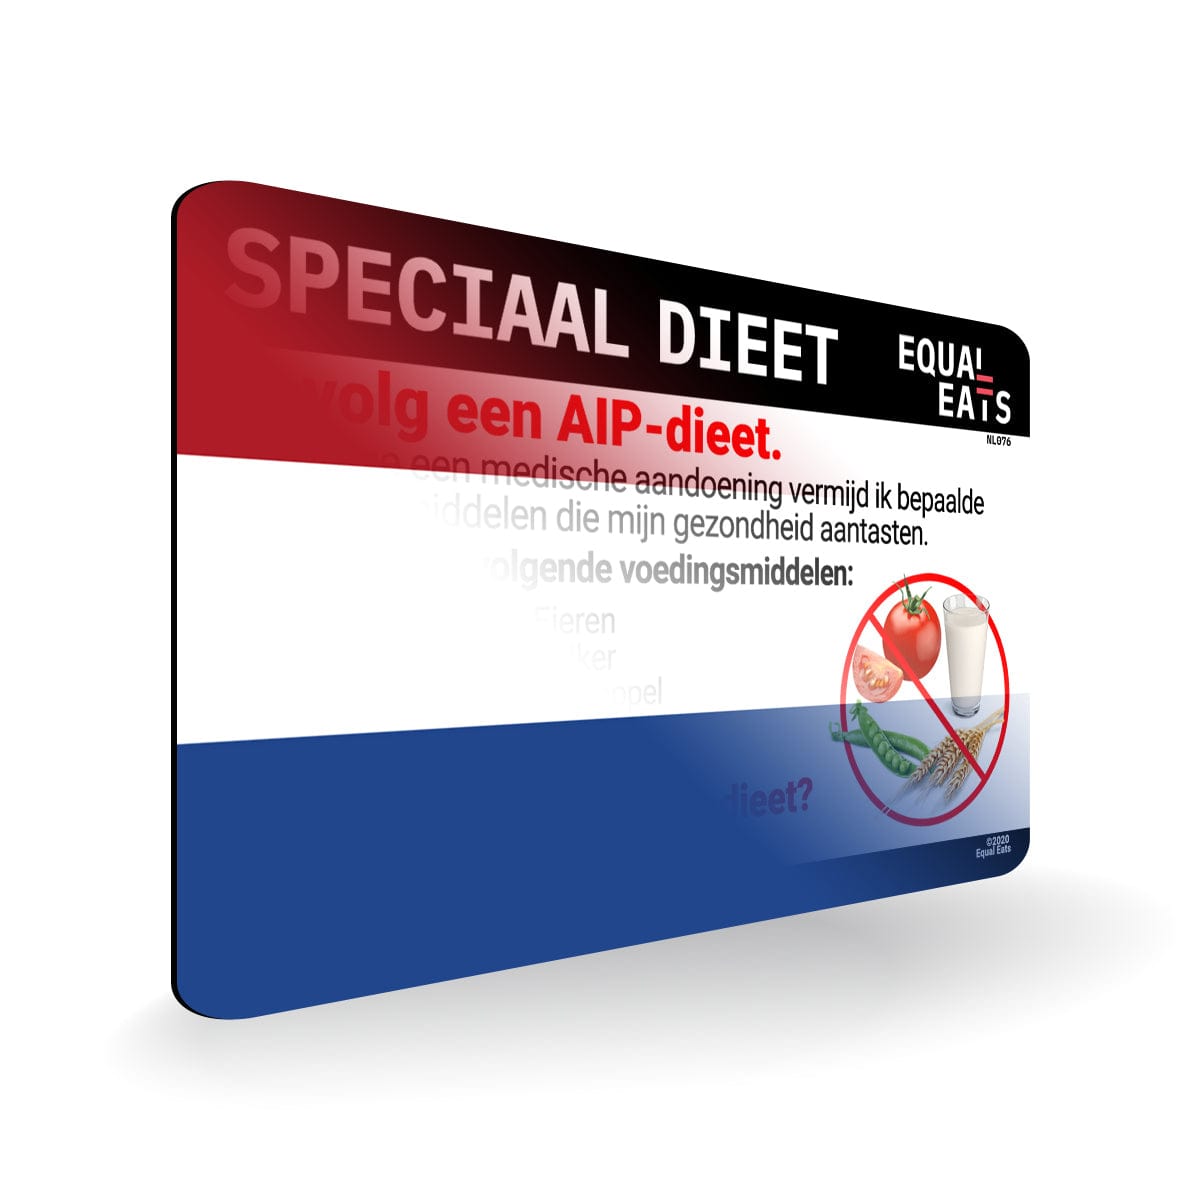 AIP Diet in Dutch. AIP Diet Card for Netherlands